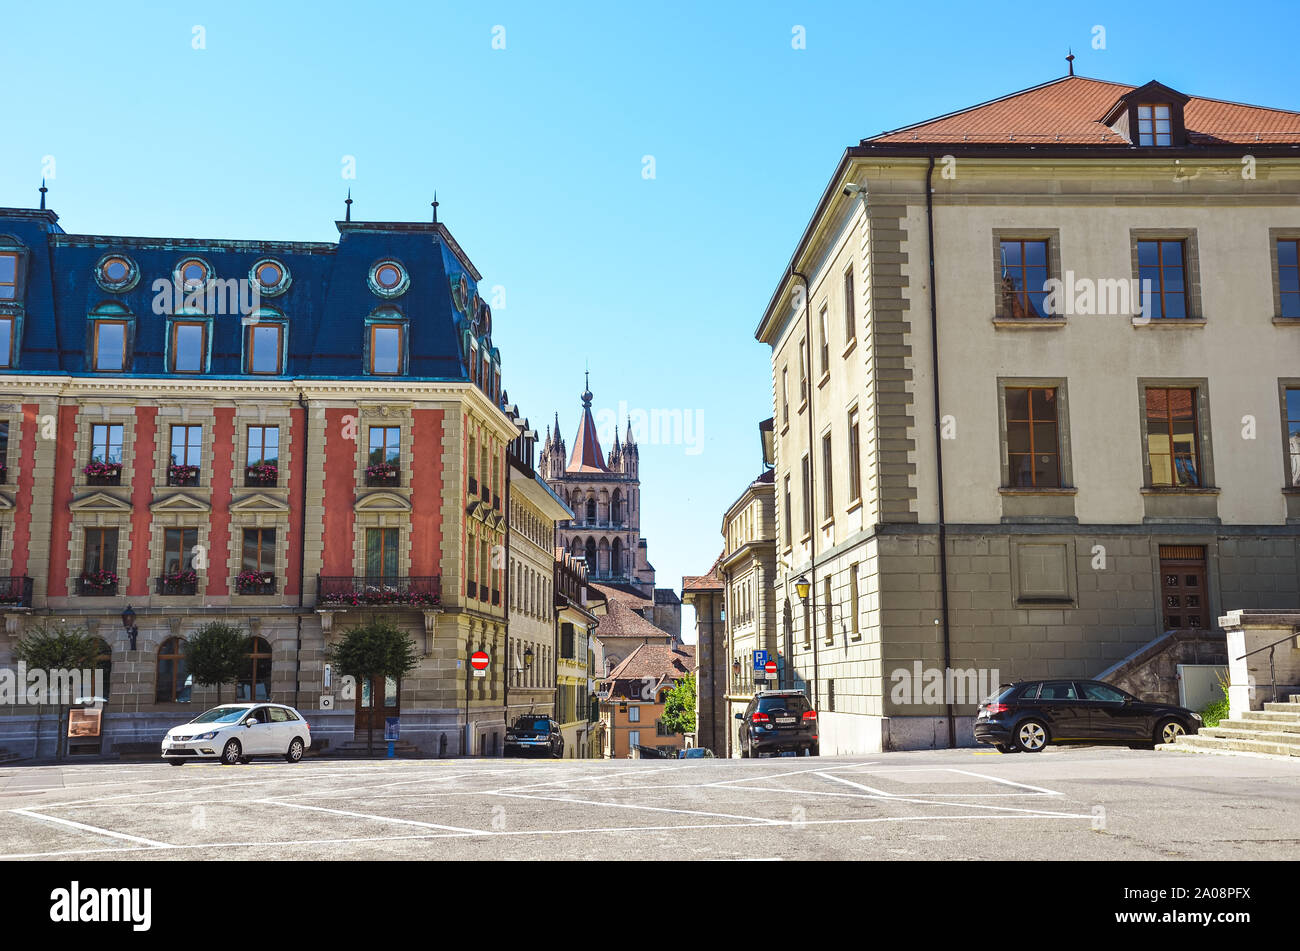 Lausanne, Switzerland - August 11, 2019: The old town of the French-speaking Swiss city with a famous Notre Dame Cathedral in the background. Historical buildings, cars on the road. Empty street. Stock Photo